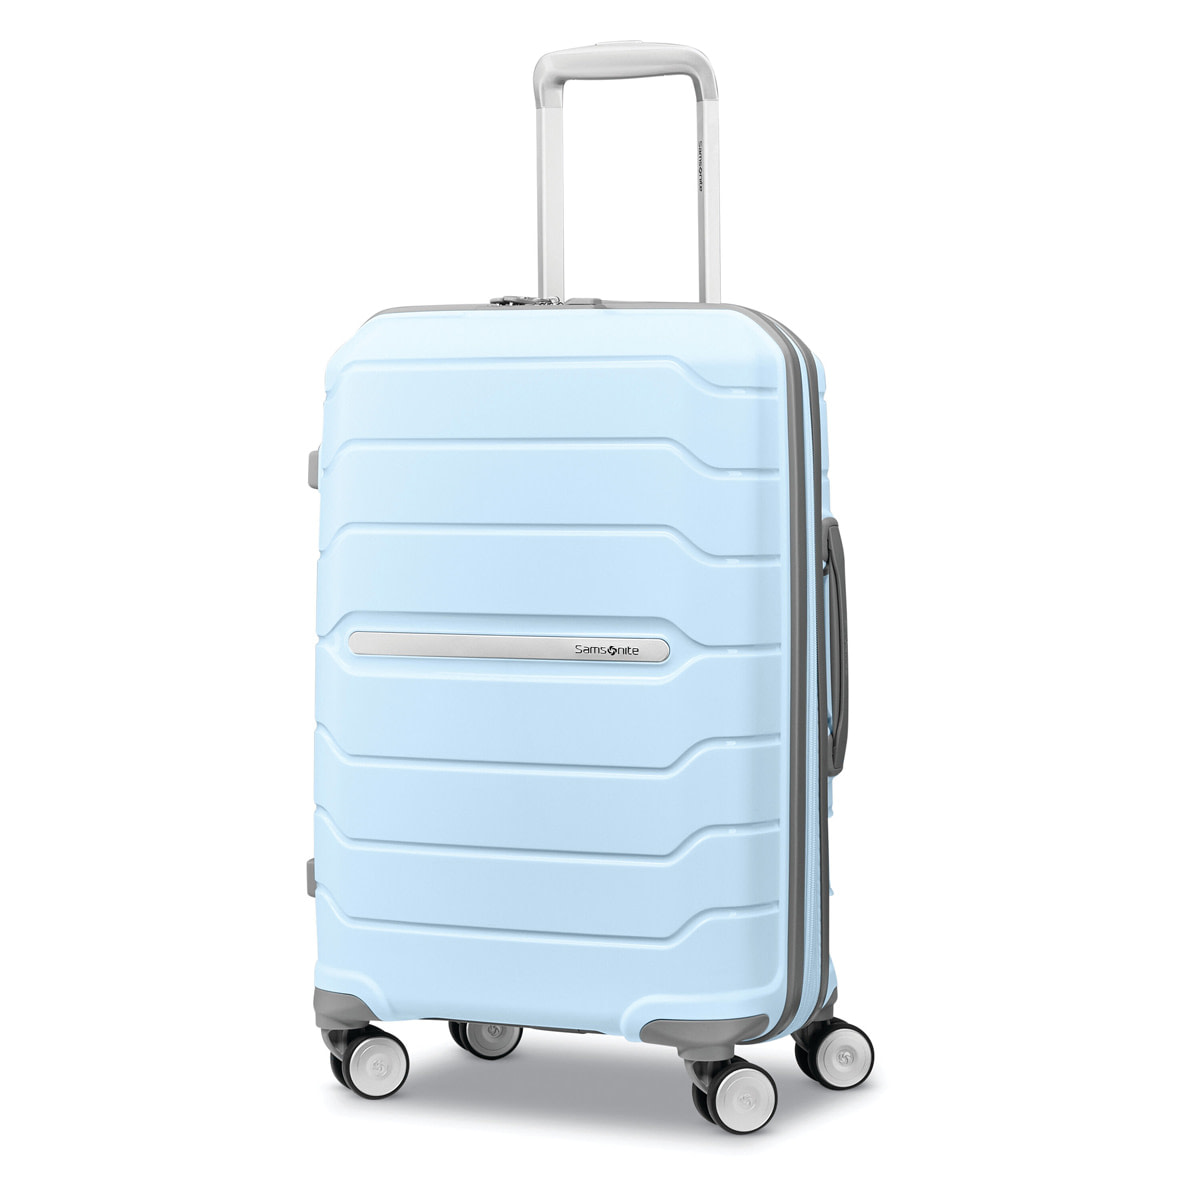 Best lightweight carry on luggage for women